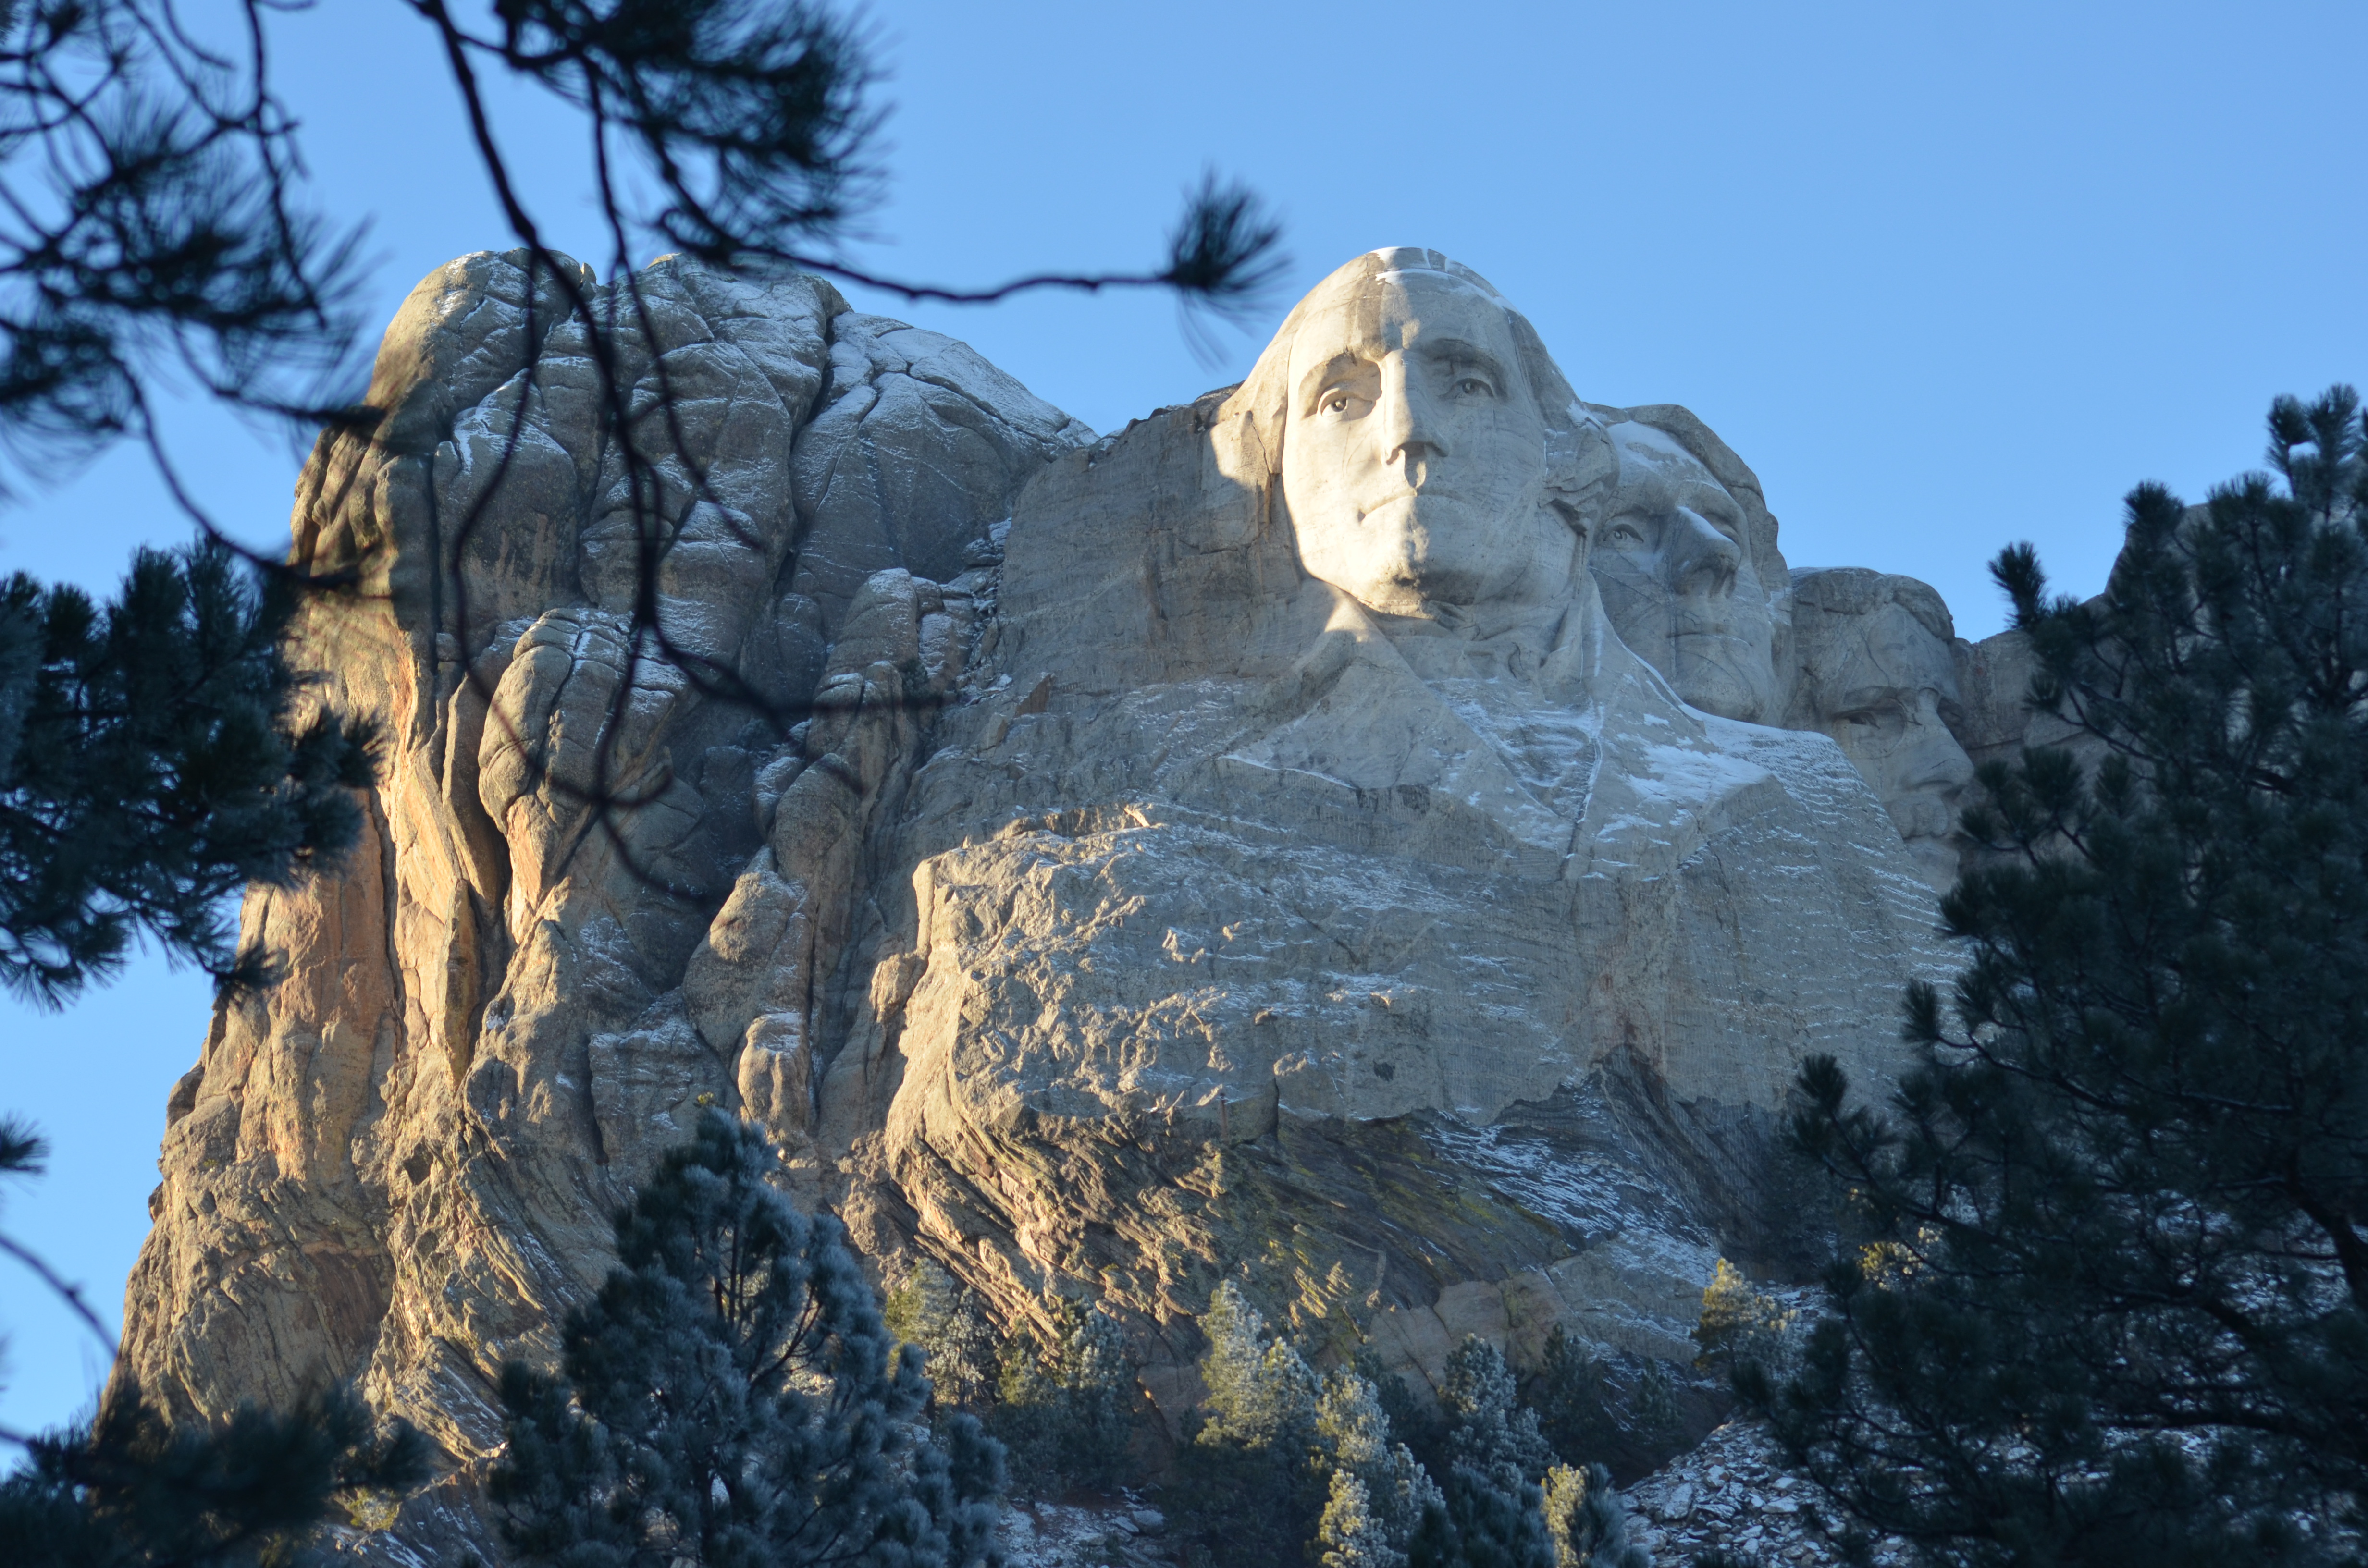 Mount Rushmore with snow on Washington's coat and head under a blue sky.